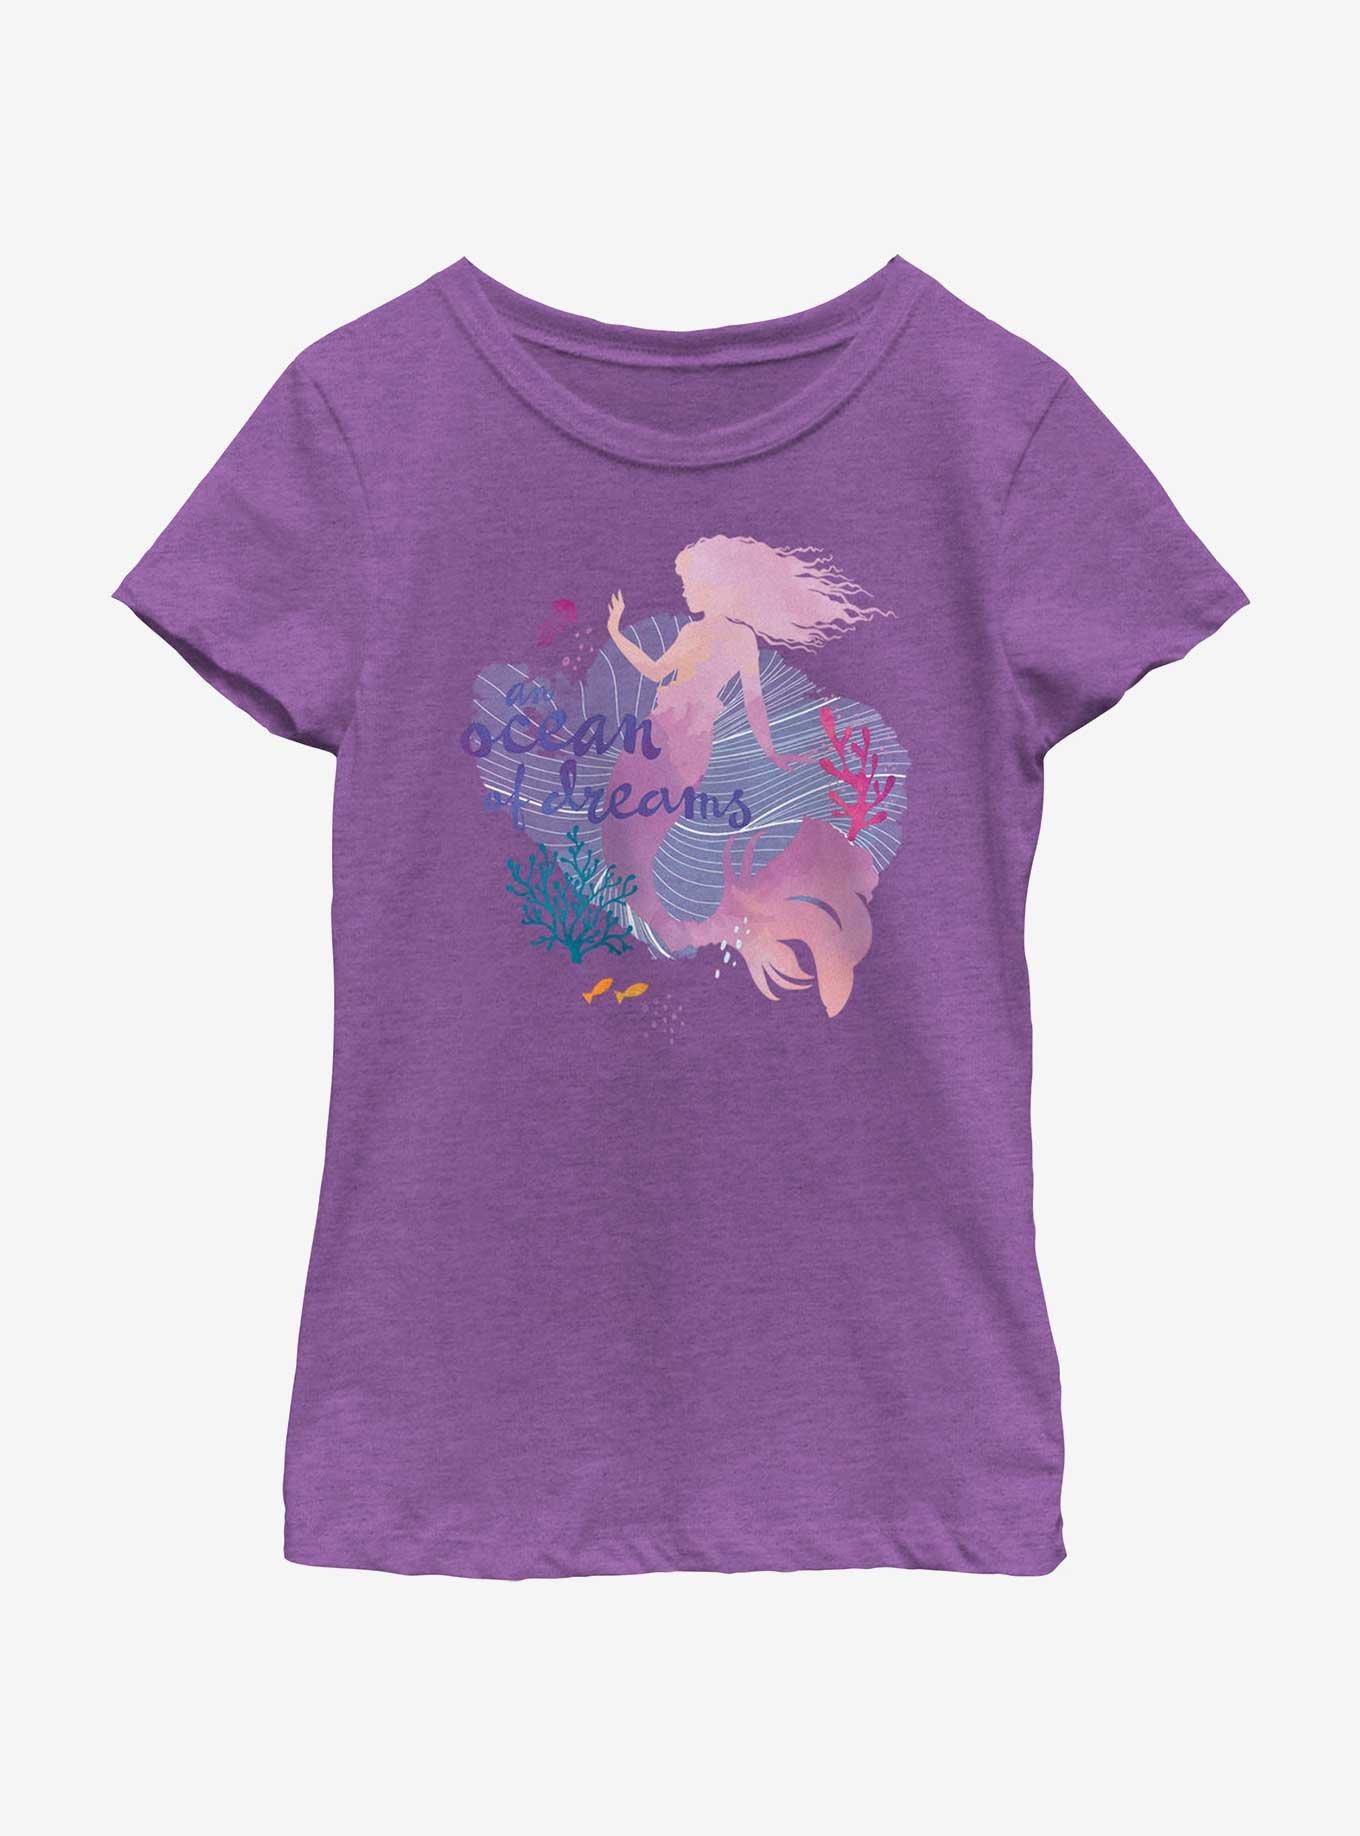 Disney The Little Mermaid Live Action Ocean Of Dreams Youth Girls T-Shirt, PURPLE BERRY, hi-res